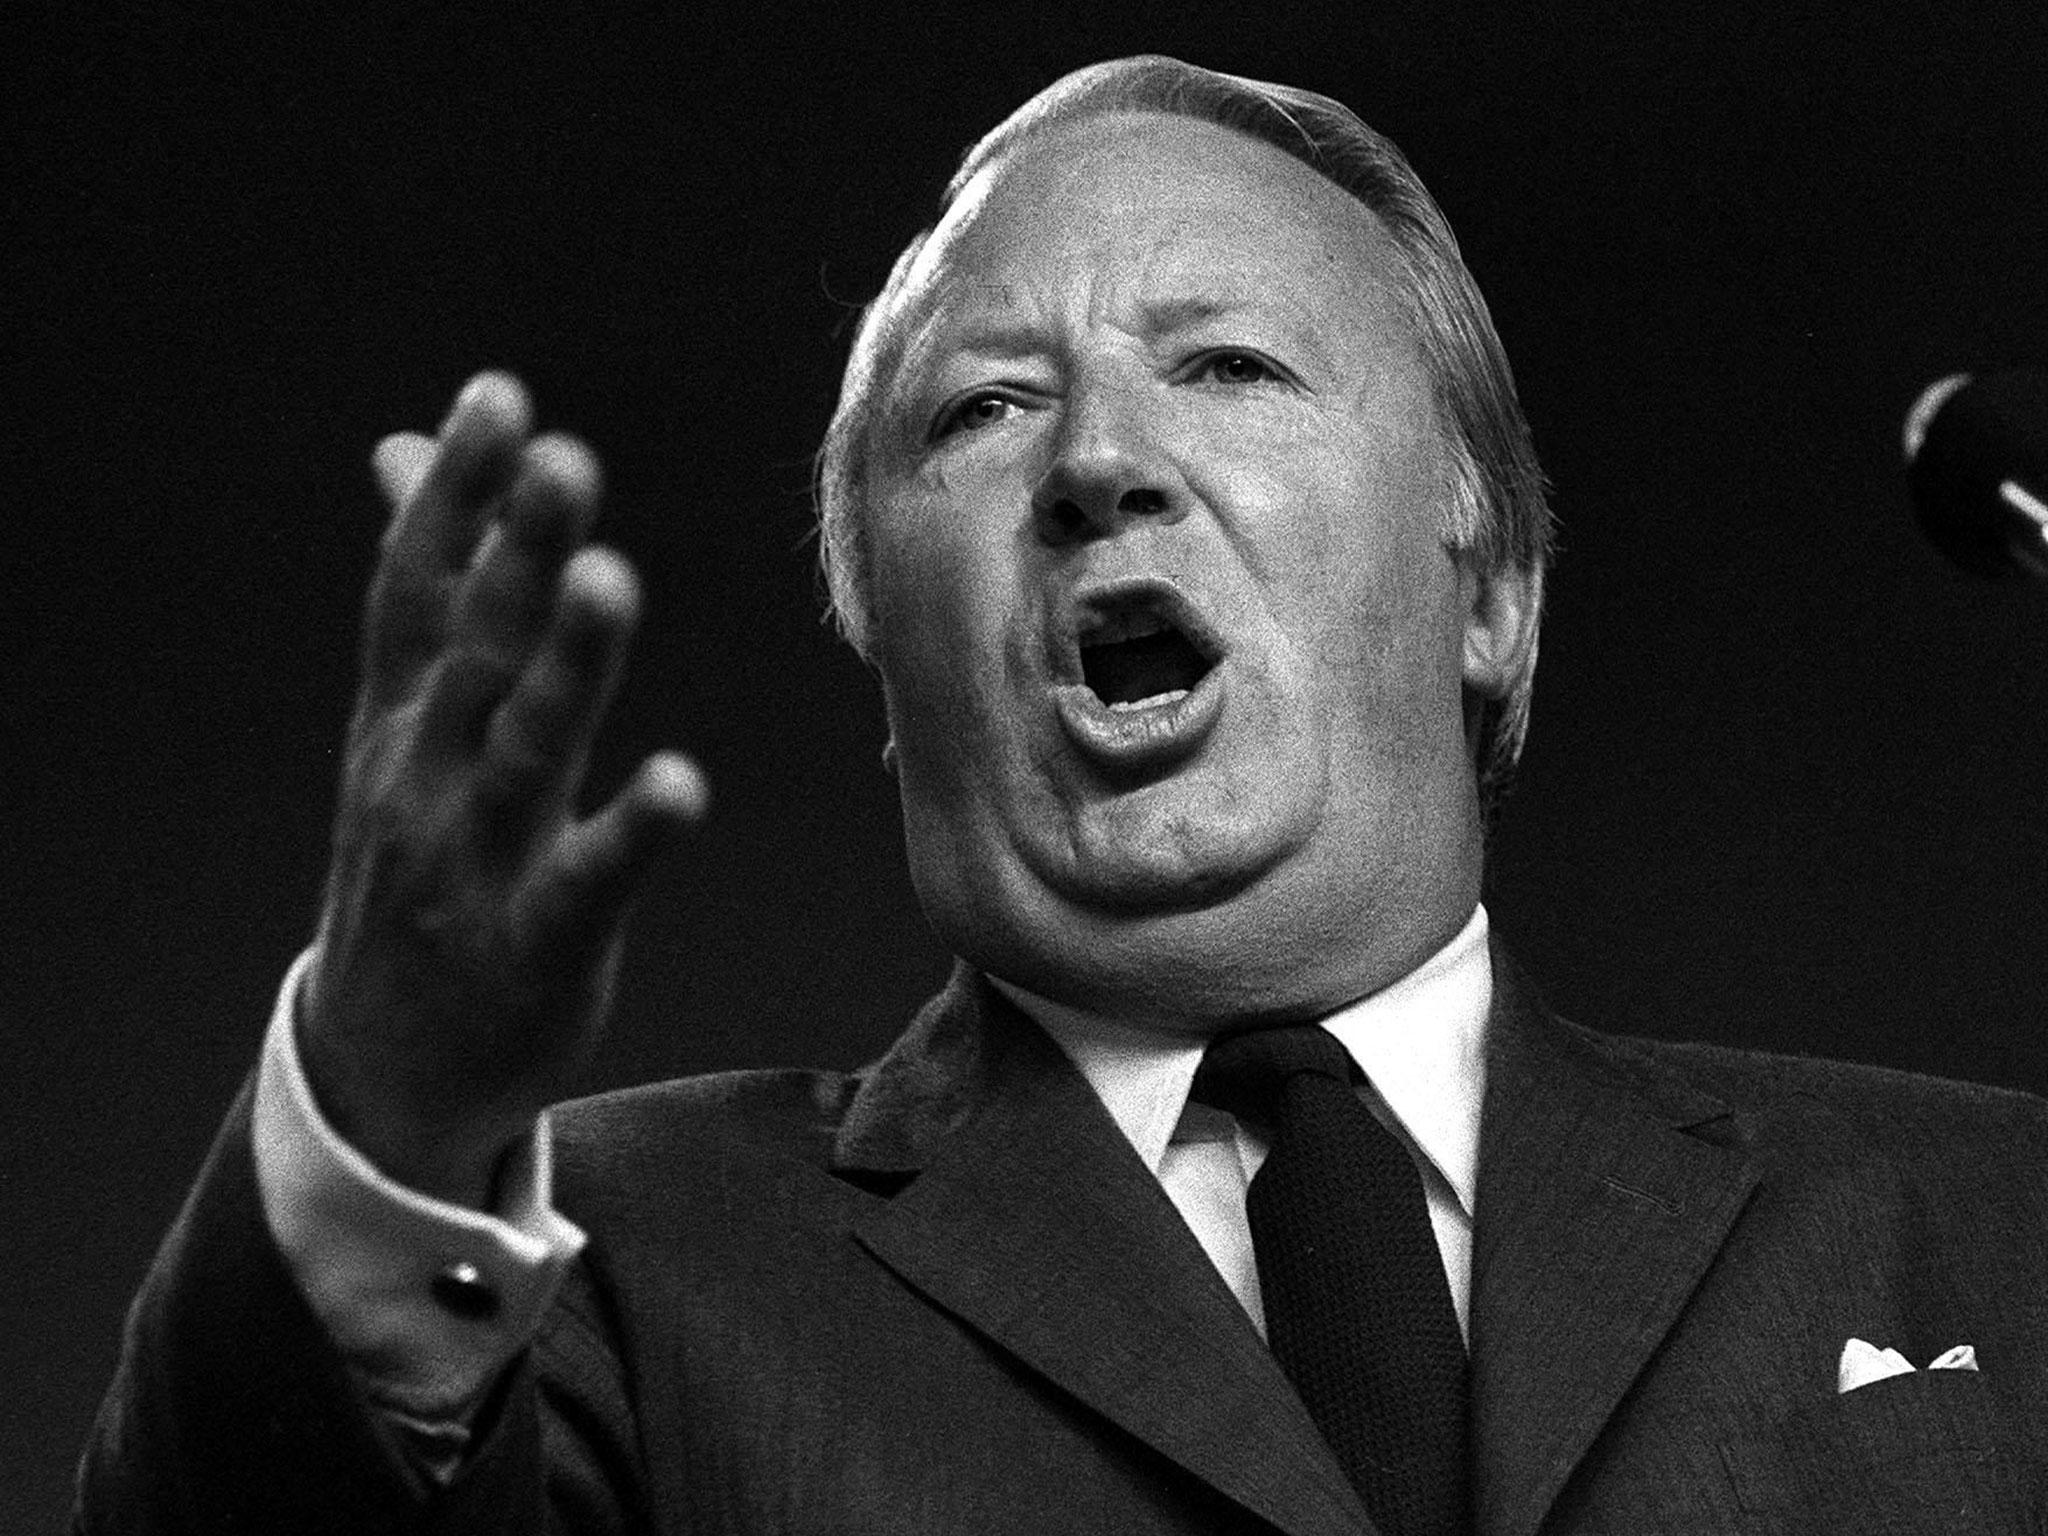 Edward Heath as Prime Minister in 1971